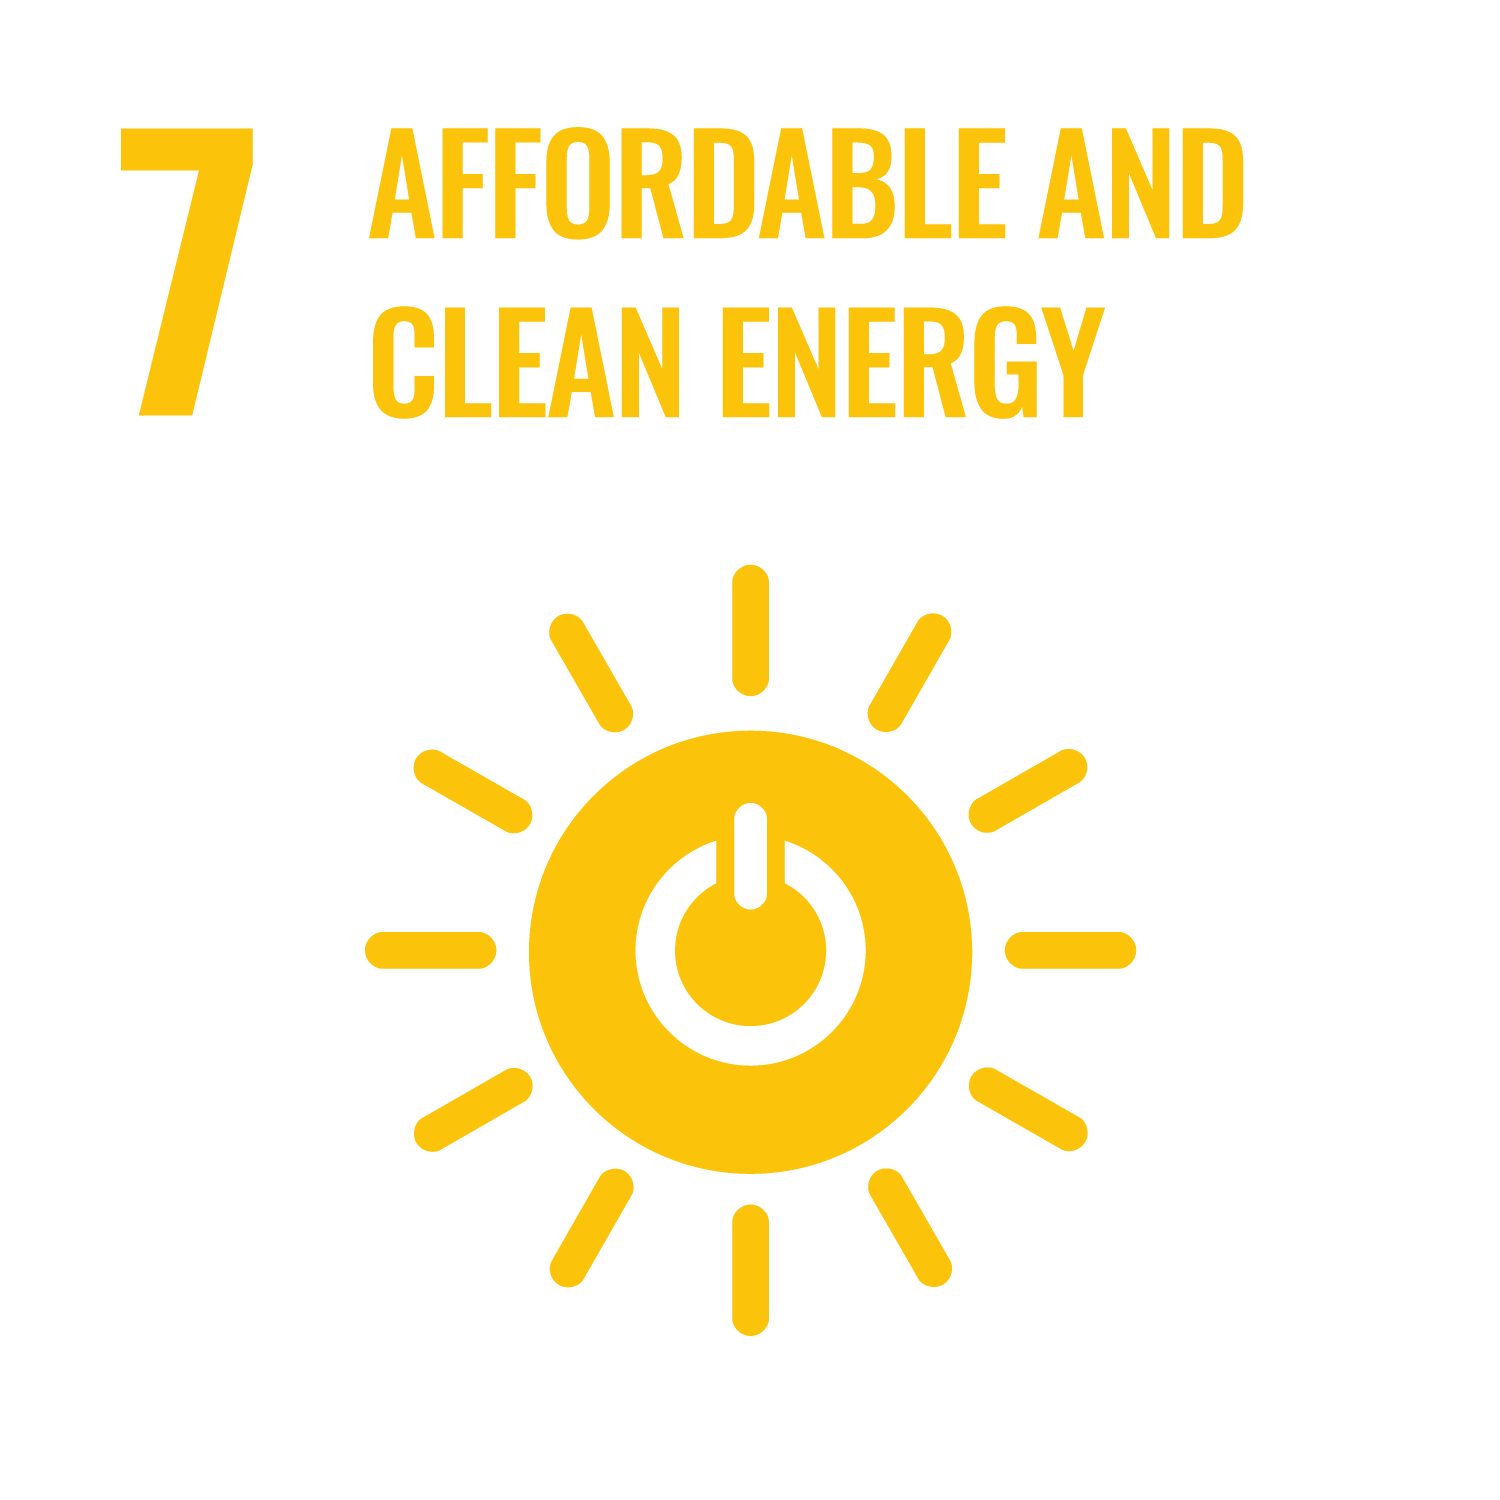 Goal 7 - Affordable and clean energy